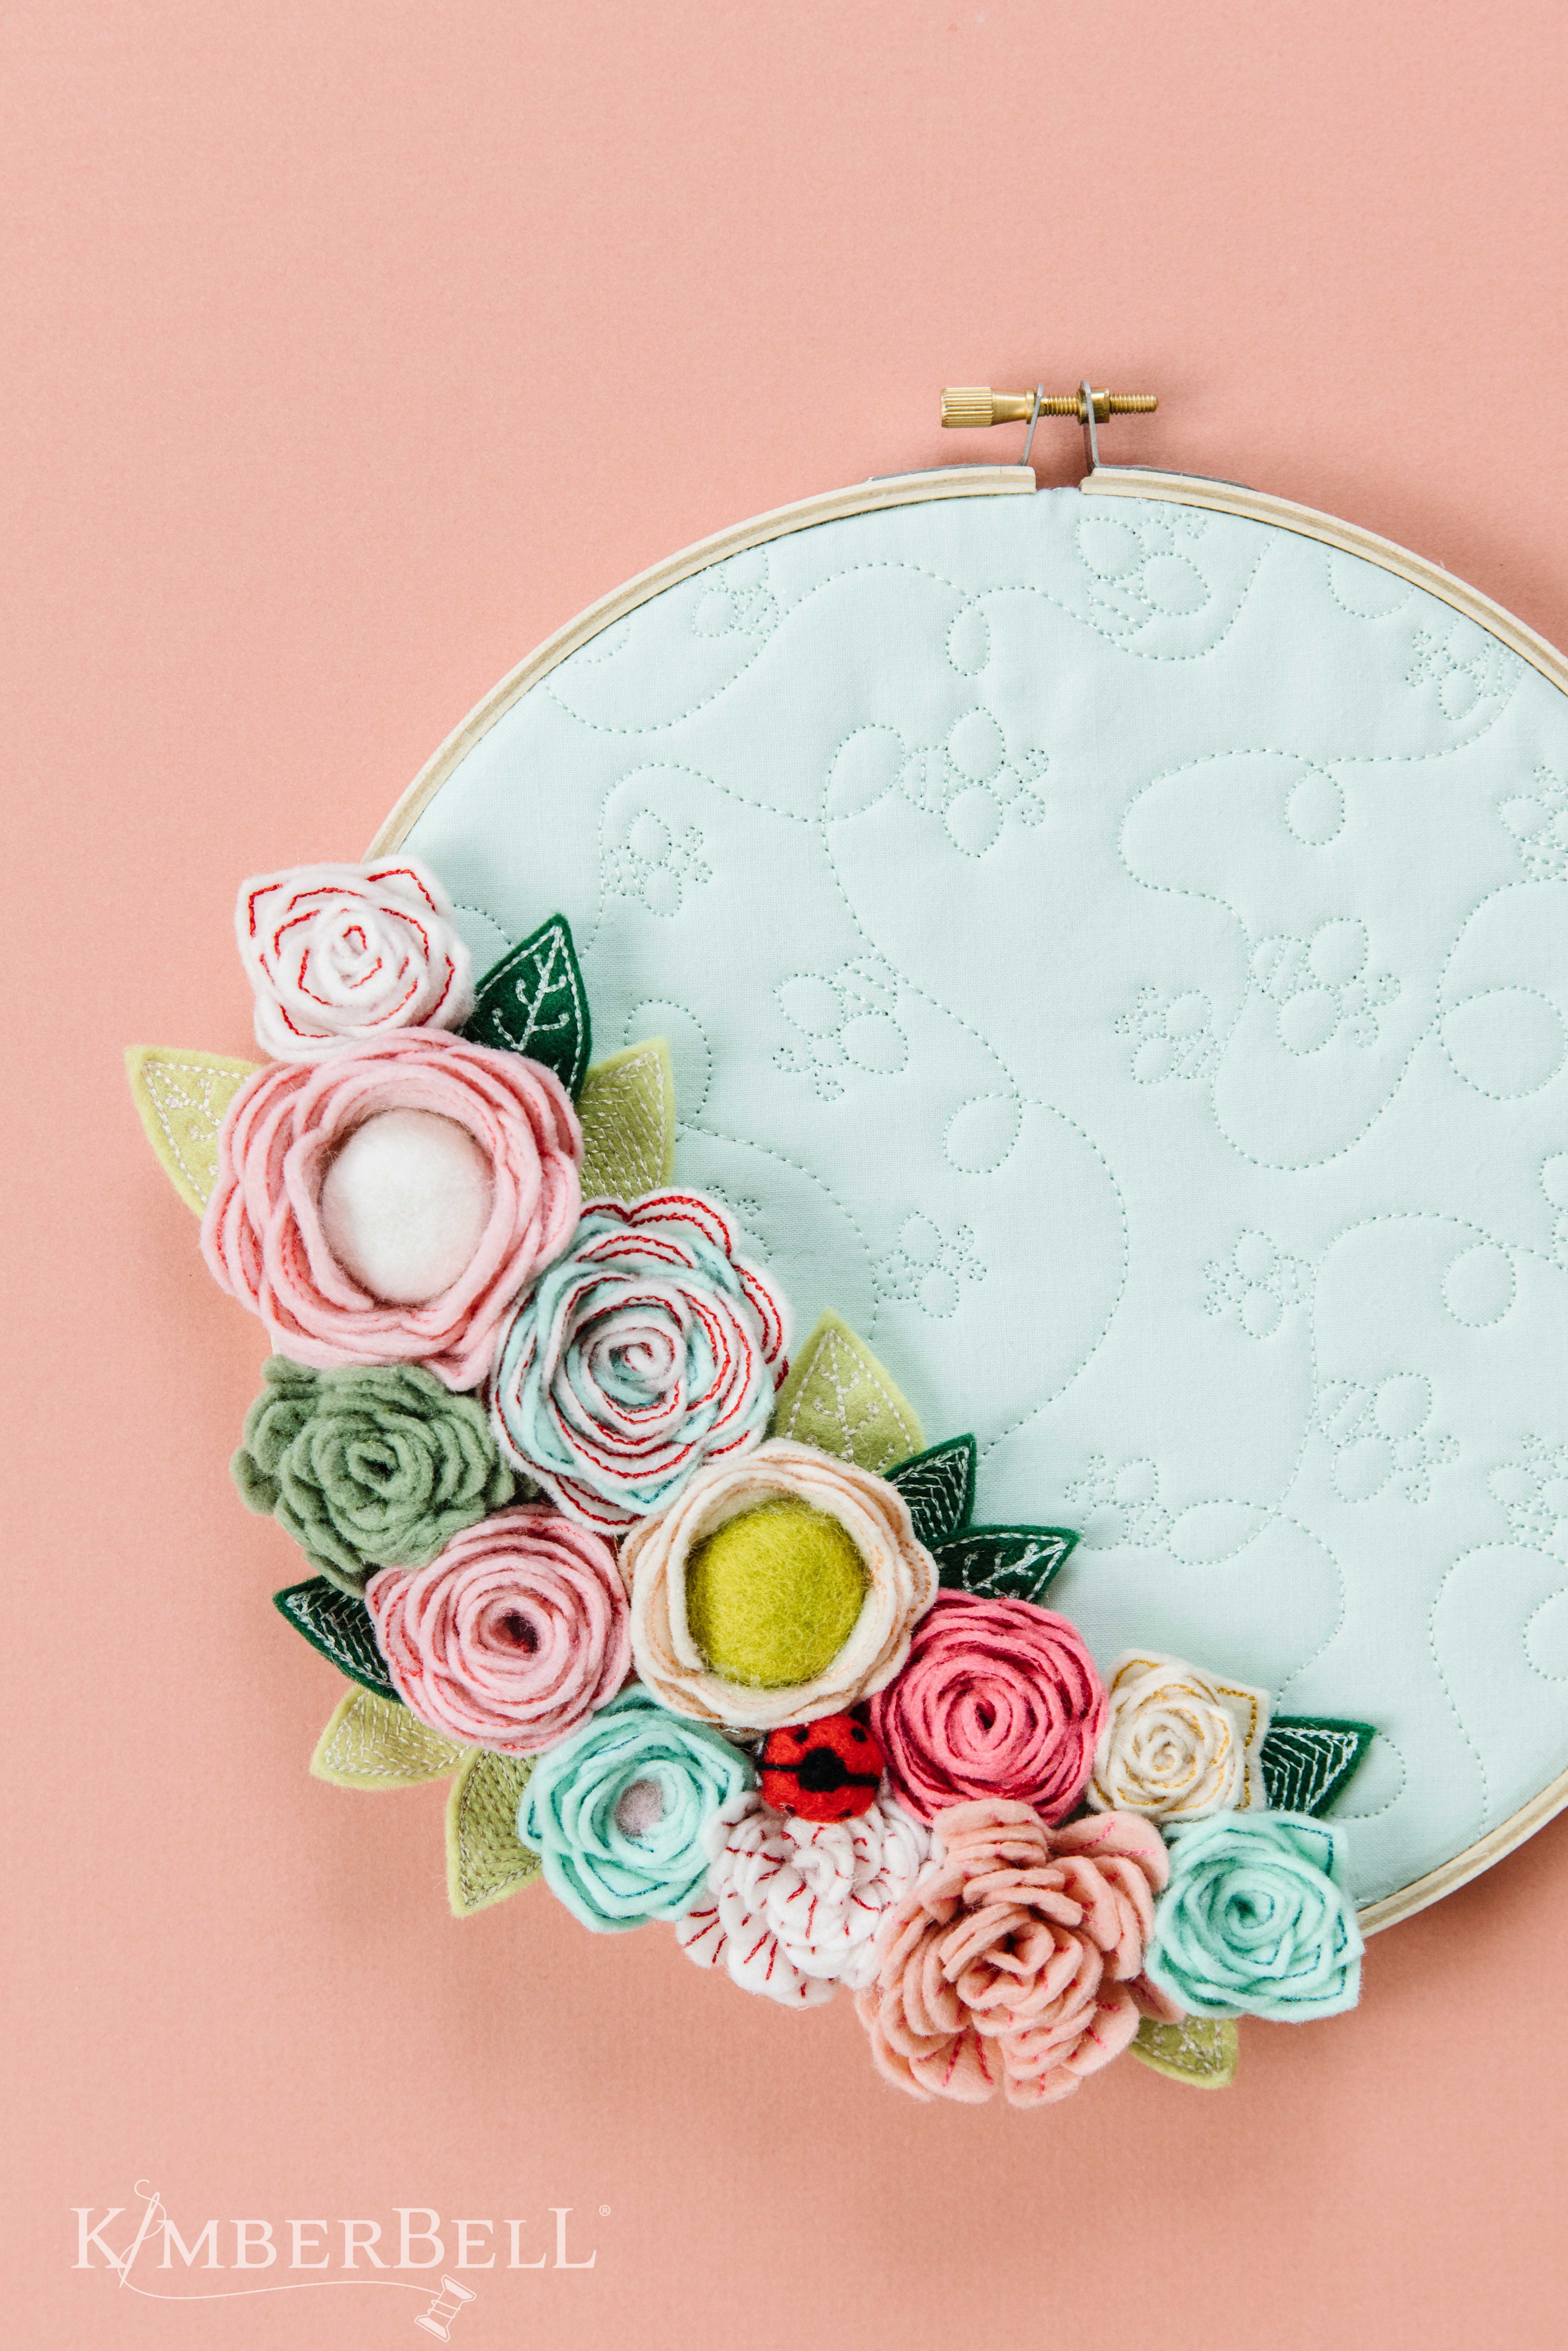 Kimberbell - One Sweet Spring Machine Embroidery Kit - 548388